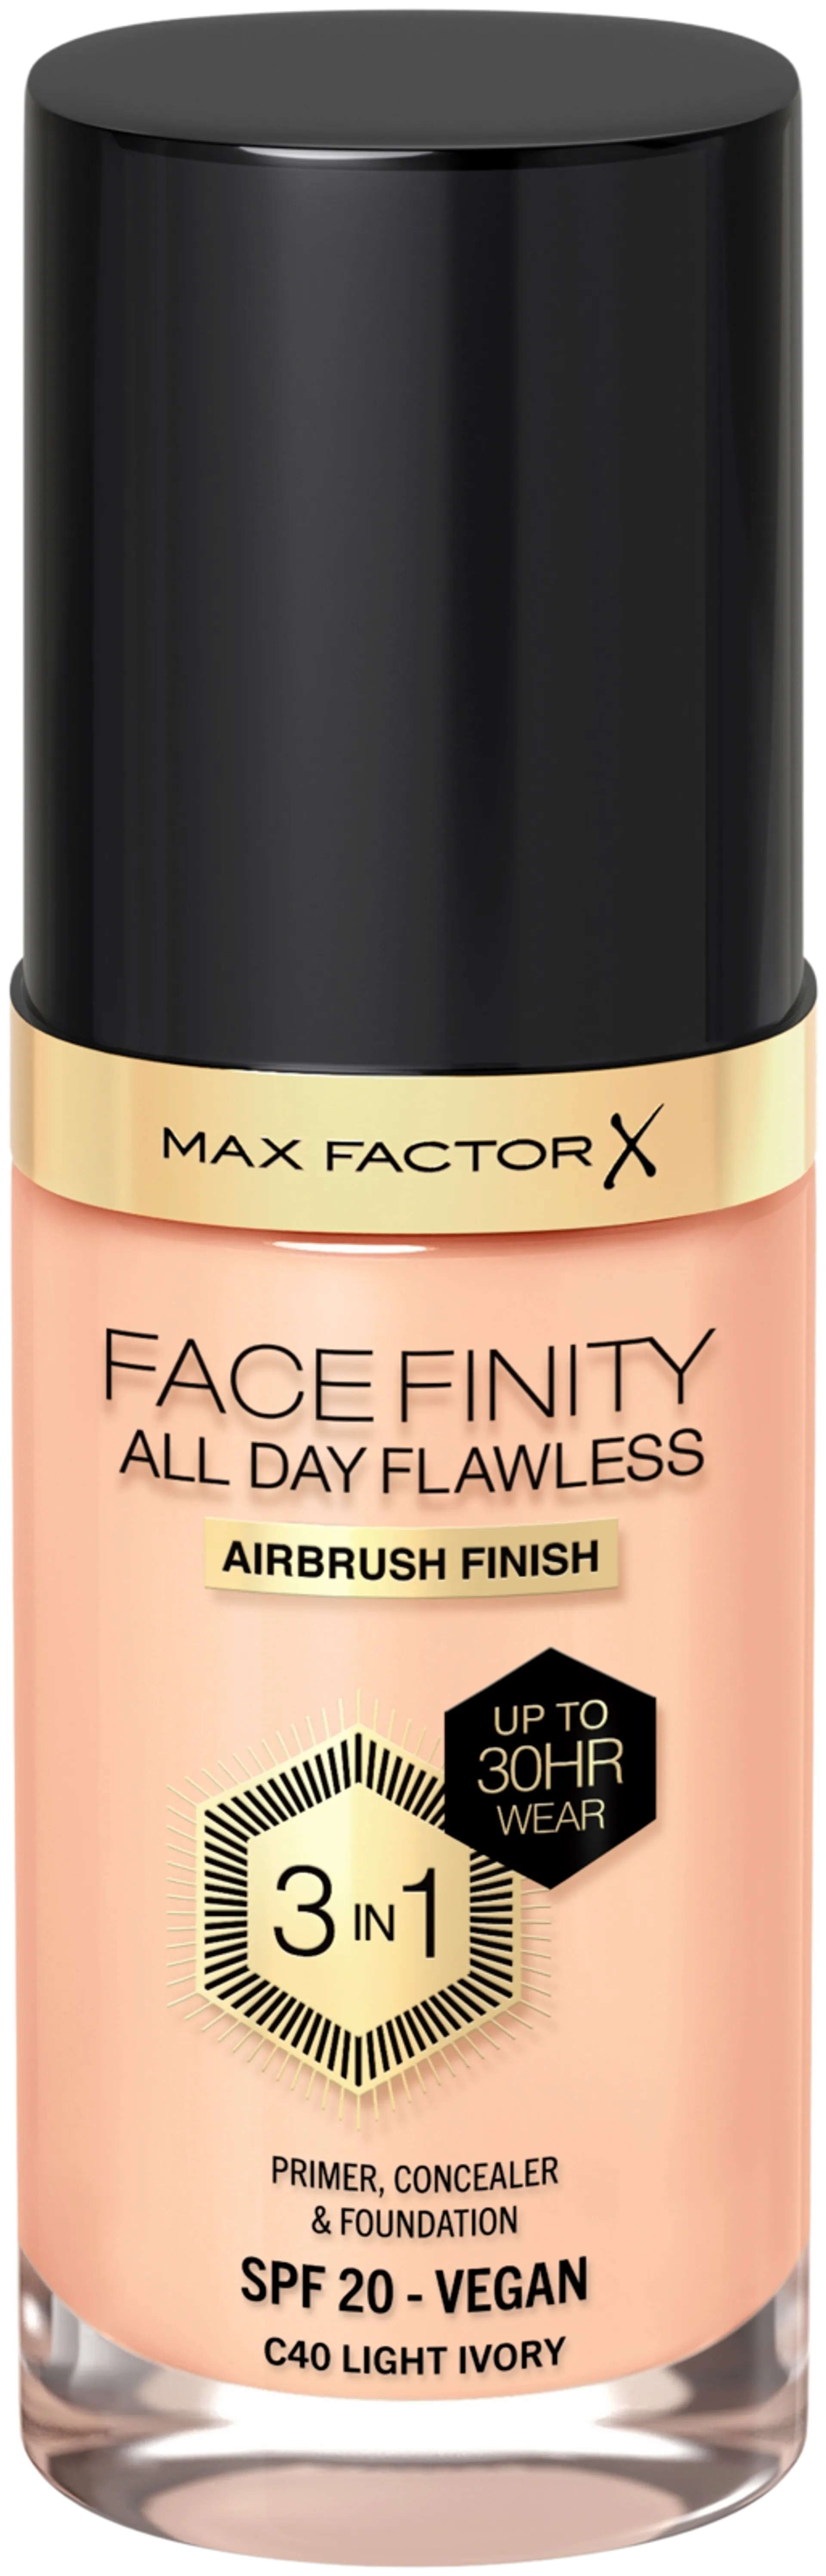 Max Factor Facefinity All Day Flawless Foundation 30 ml, 40 Light Ivory - Light ivory - 1